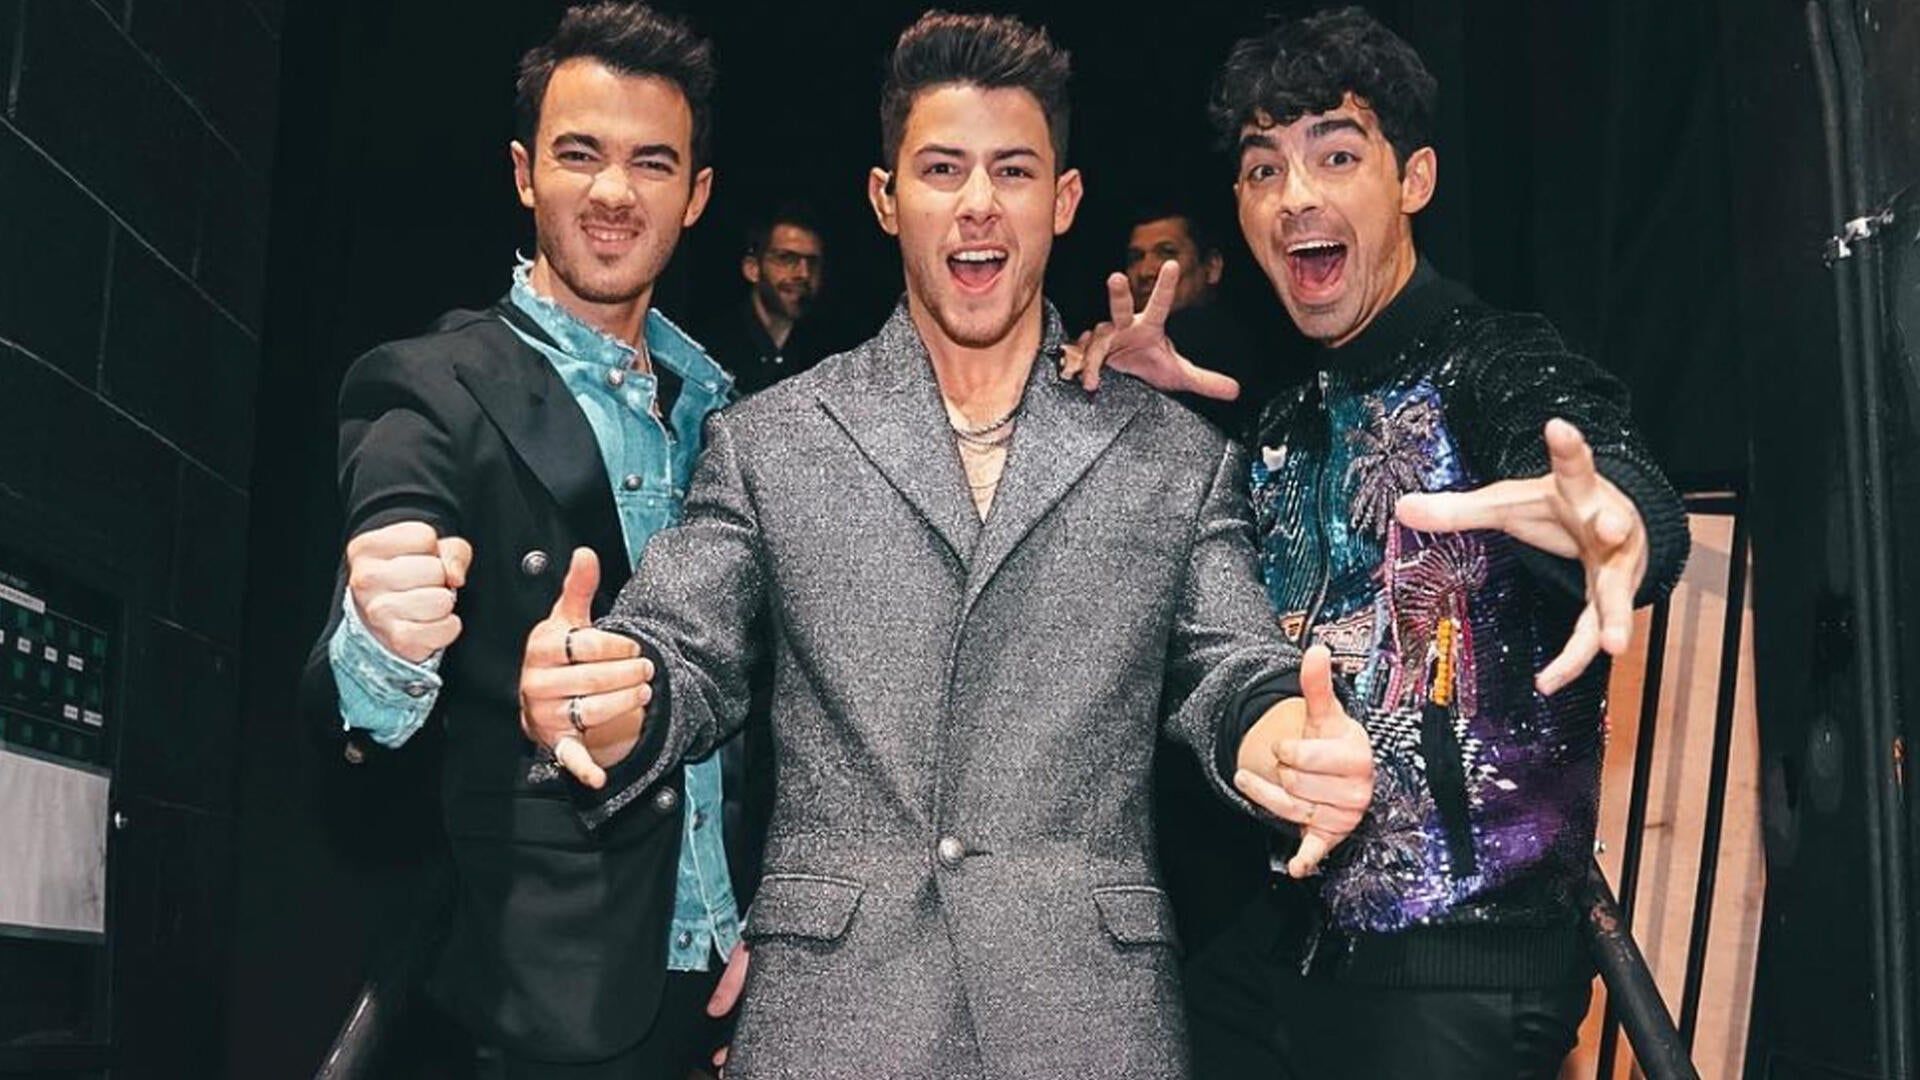 The Jonas Brothers Announces New North American Tour